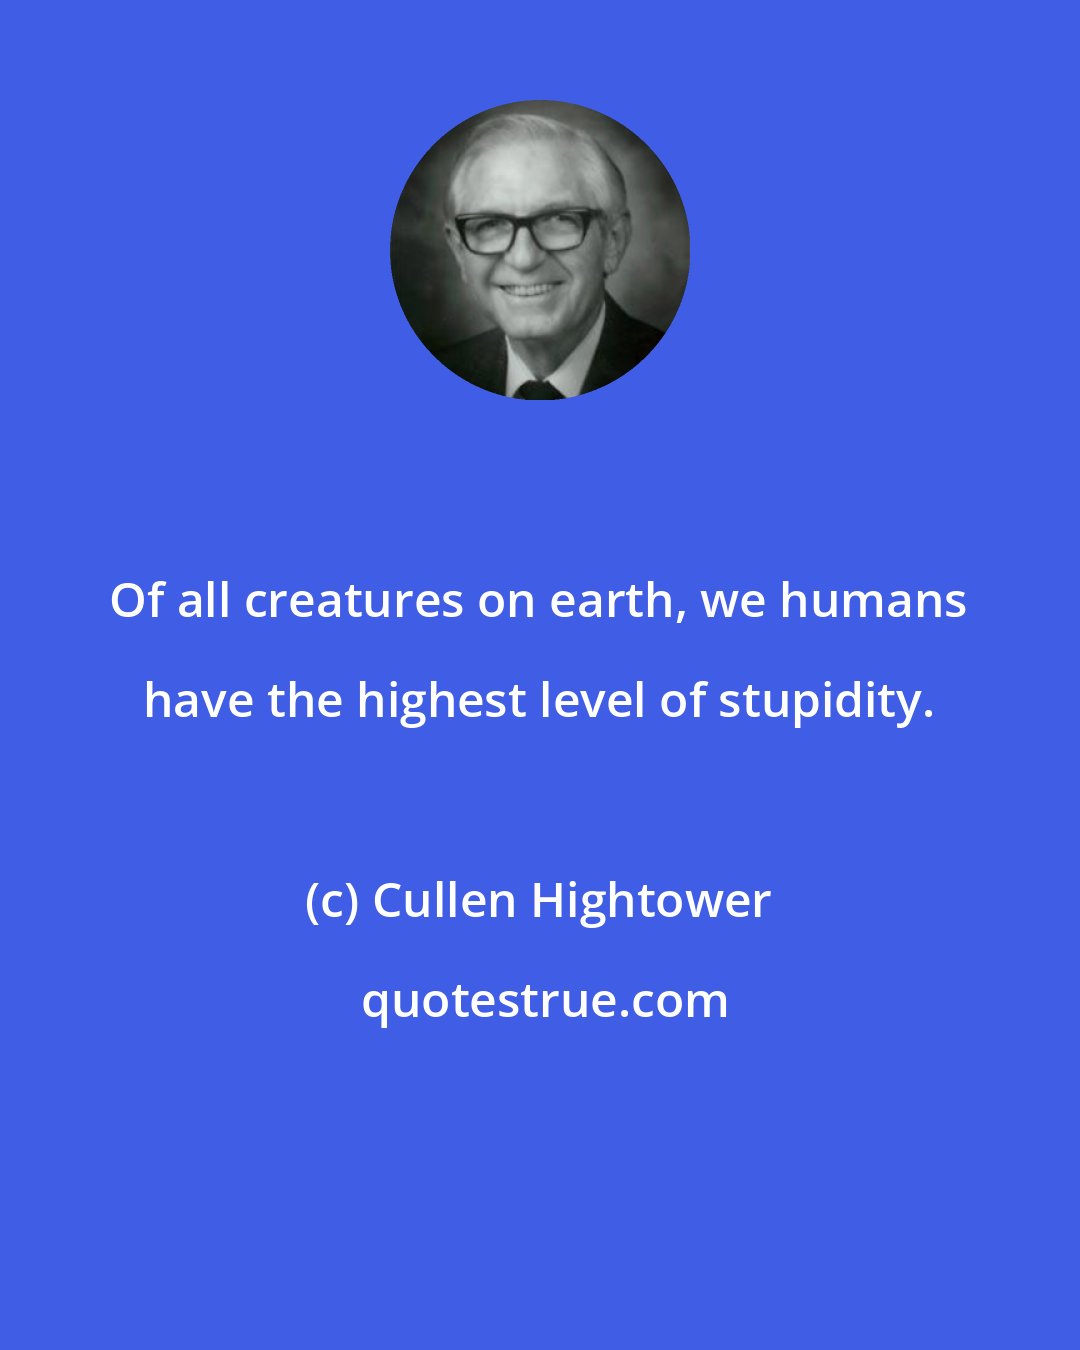 Cullen Hightower: Of all creatures on earth, we humans have the highest level of stupidity.